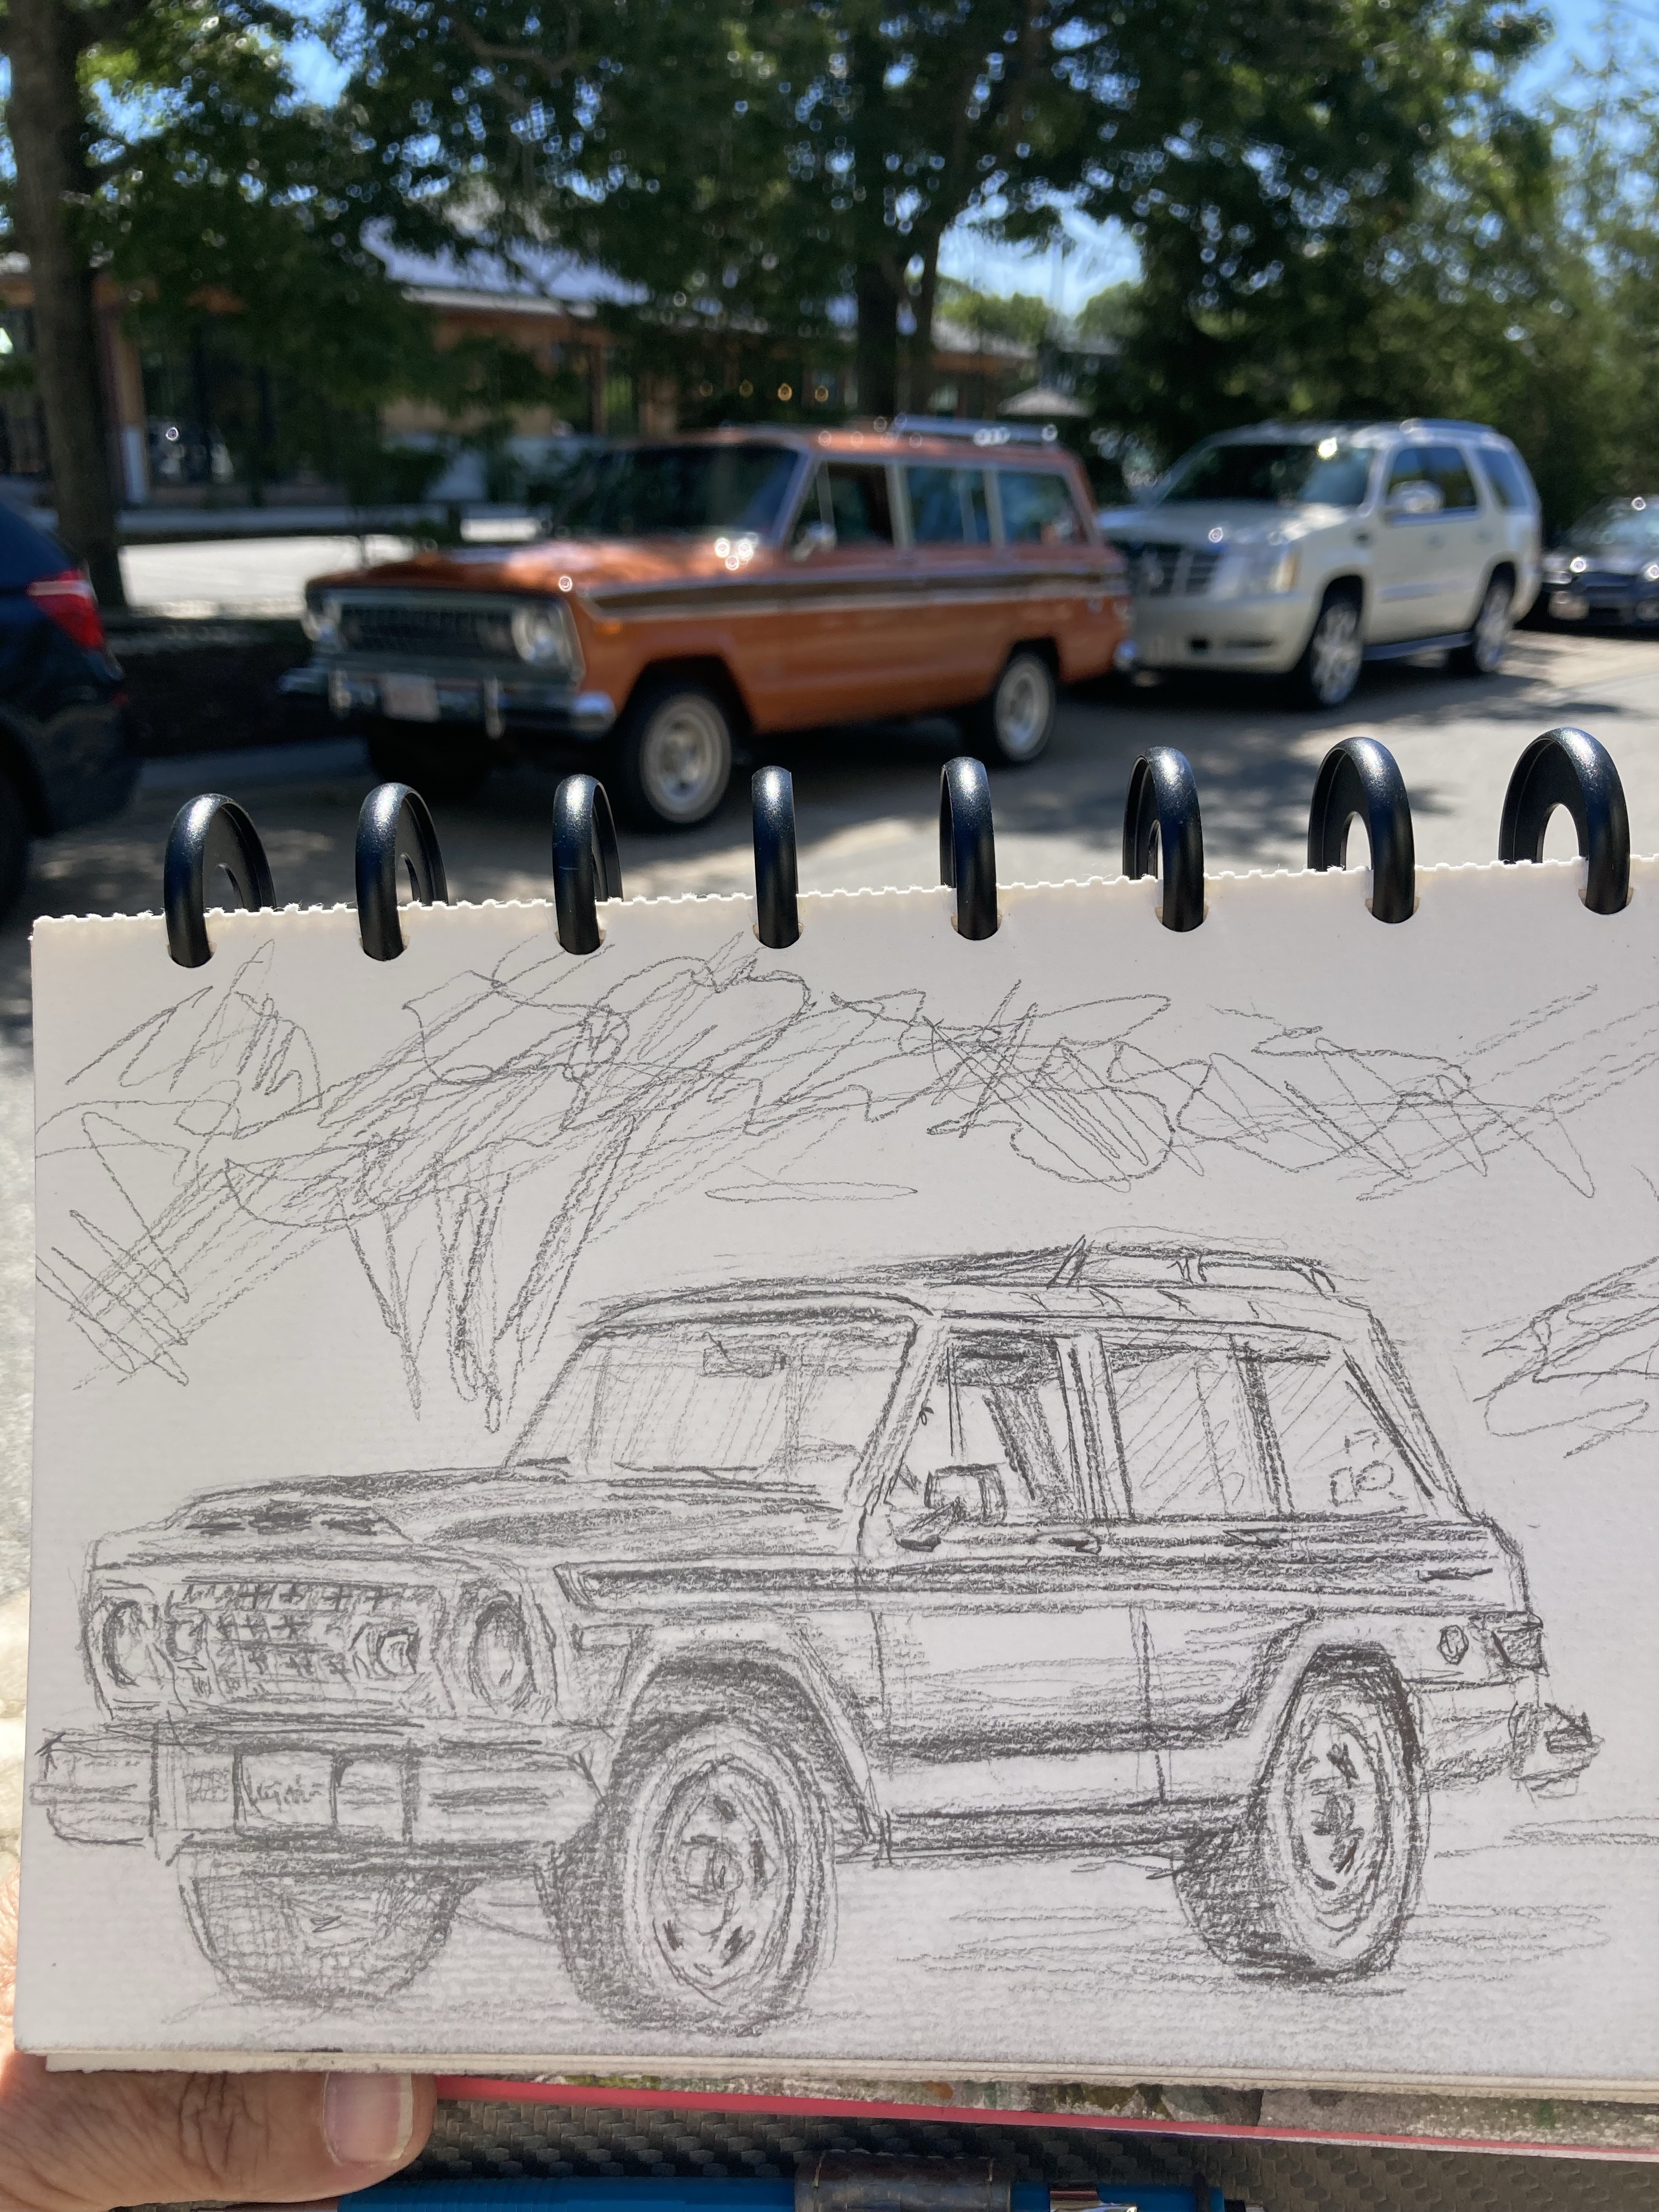 Random Sketch: At the Tire Place